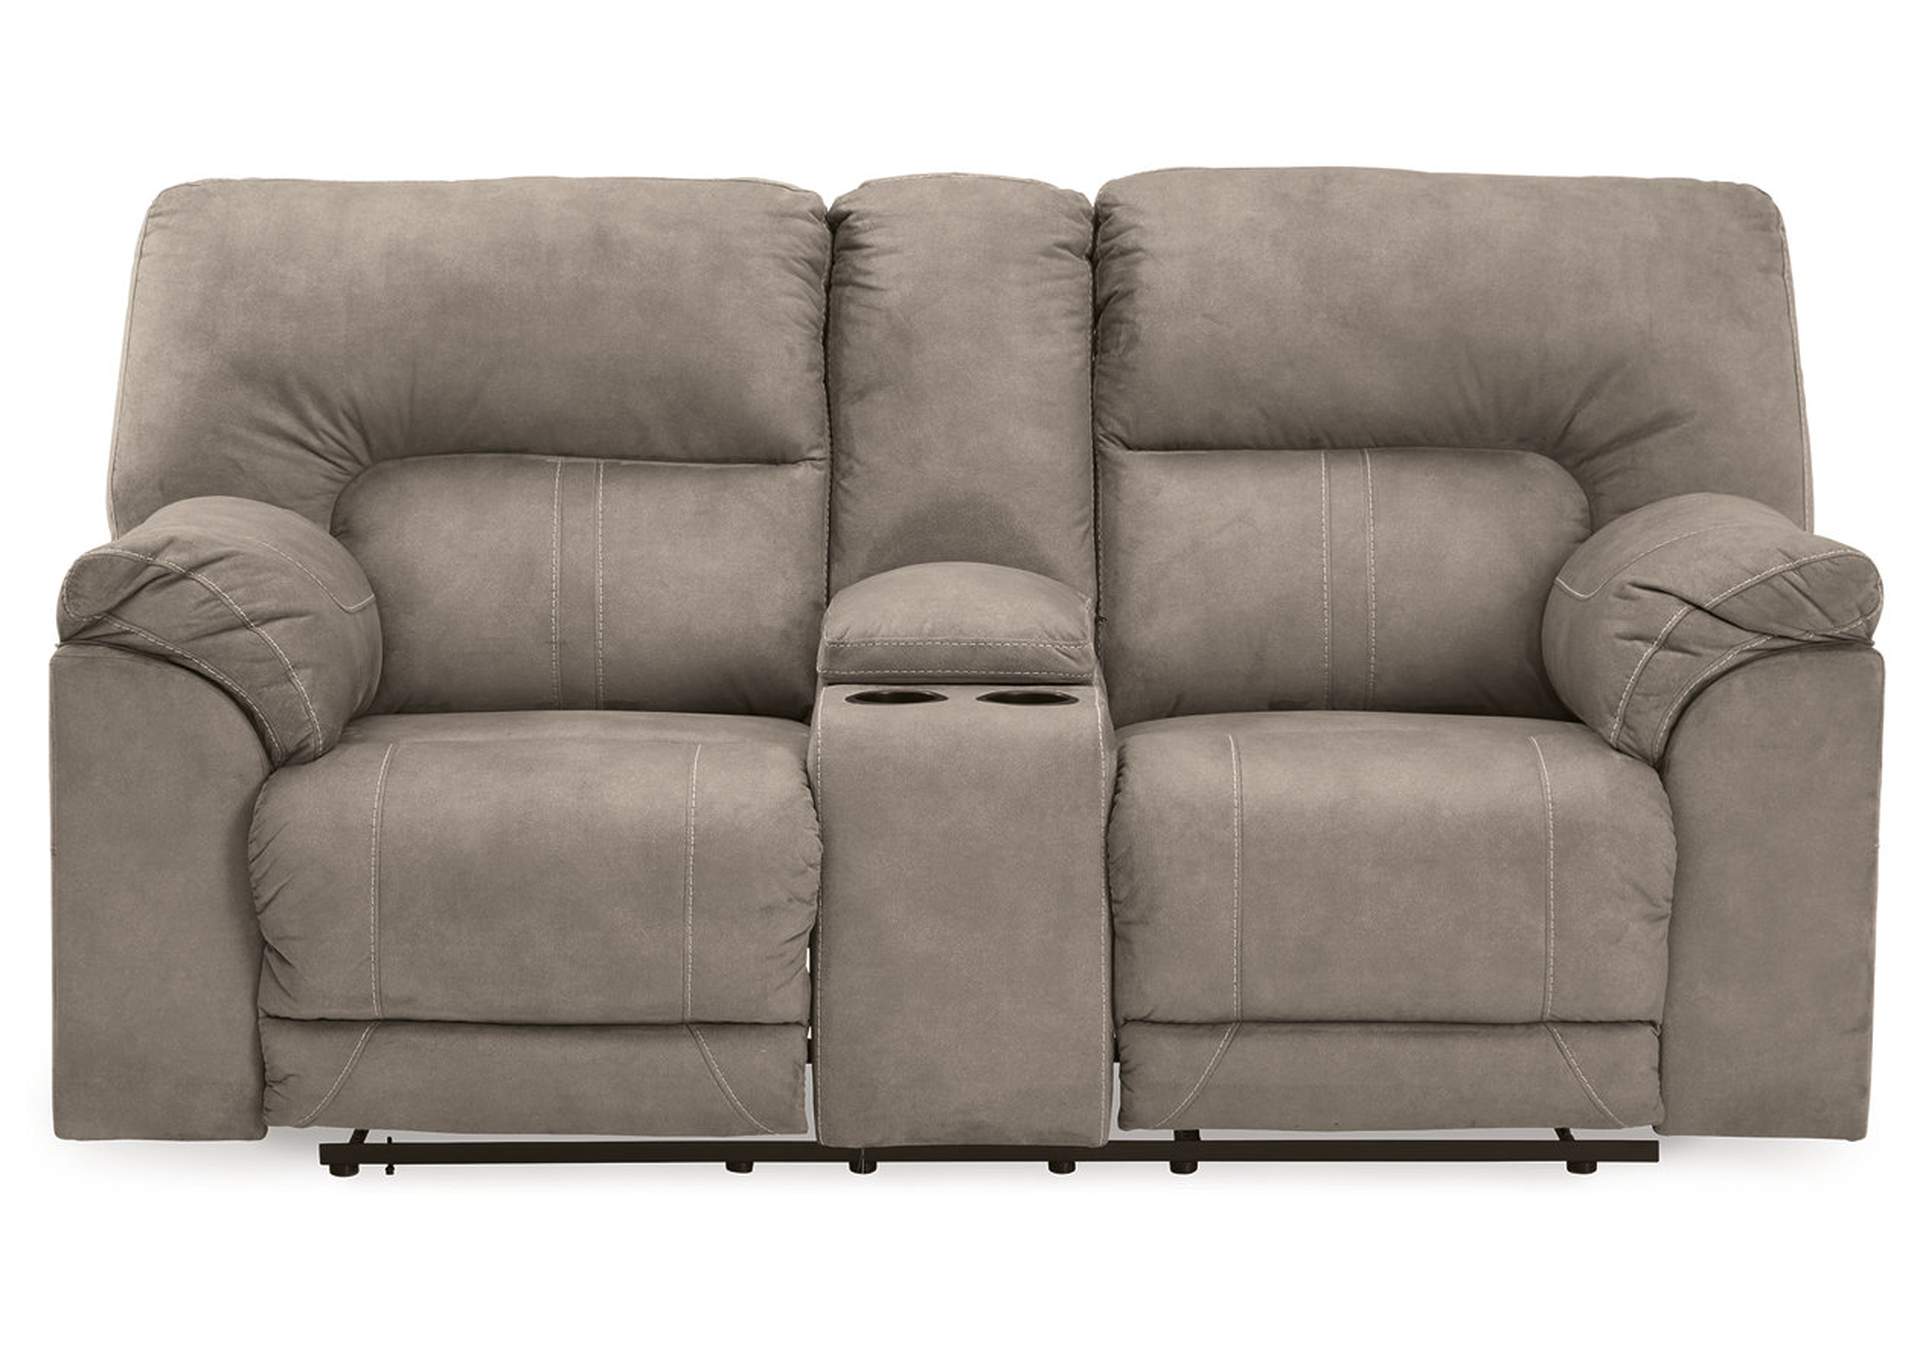 Cavalcade Power Reclining Loveseat with Console,Benchcraft